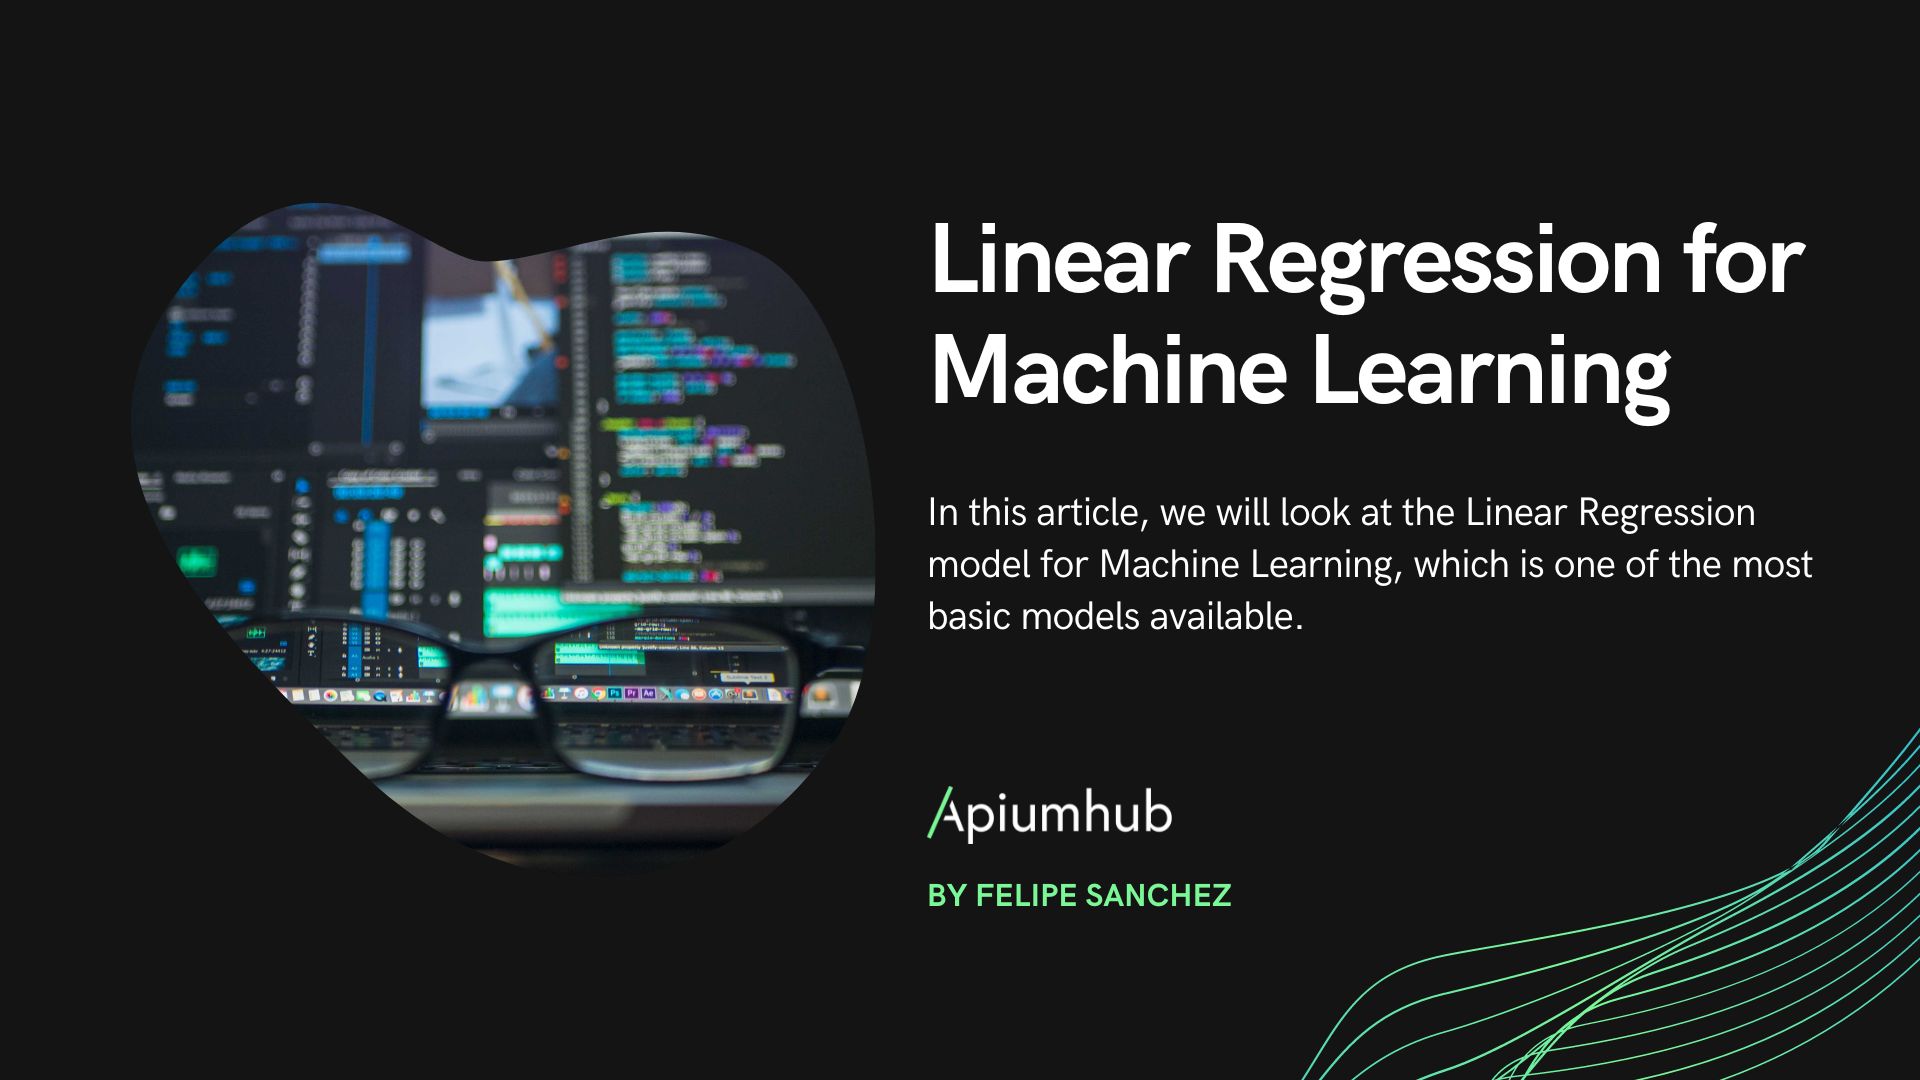 Linear Regression for Machine Learning